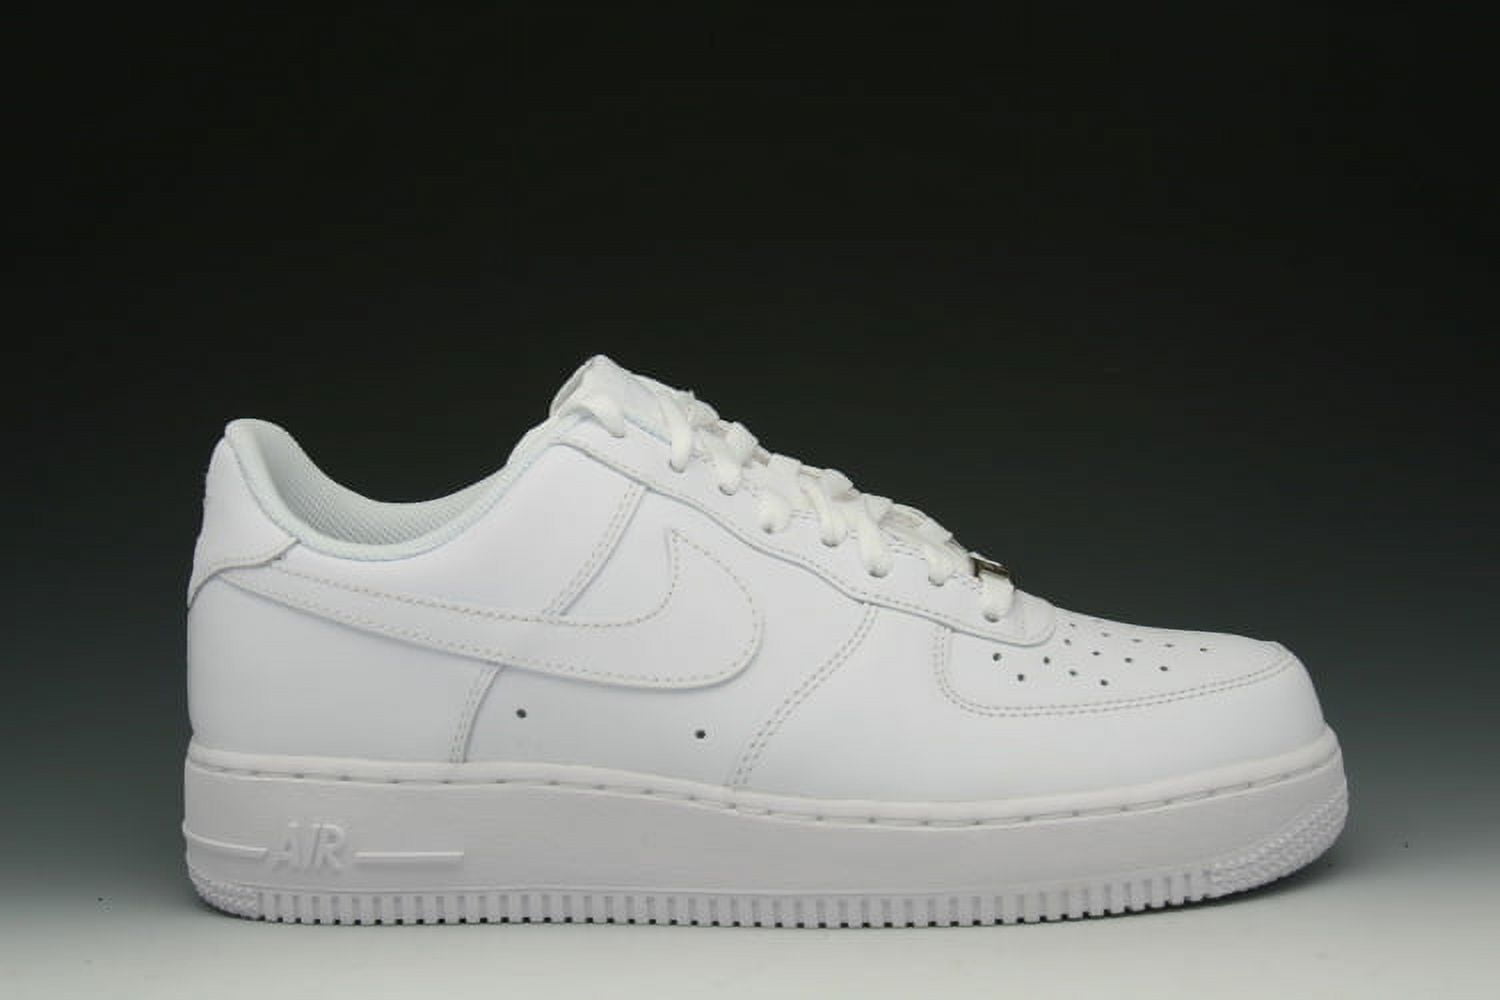 Nike Air Force 1 Low '07 3 White Black 2018 Men's Athletic Shoes Size 12